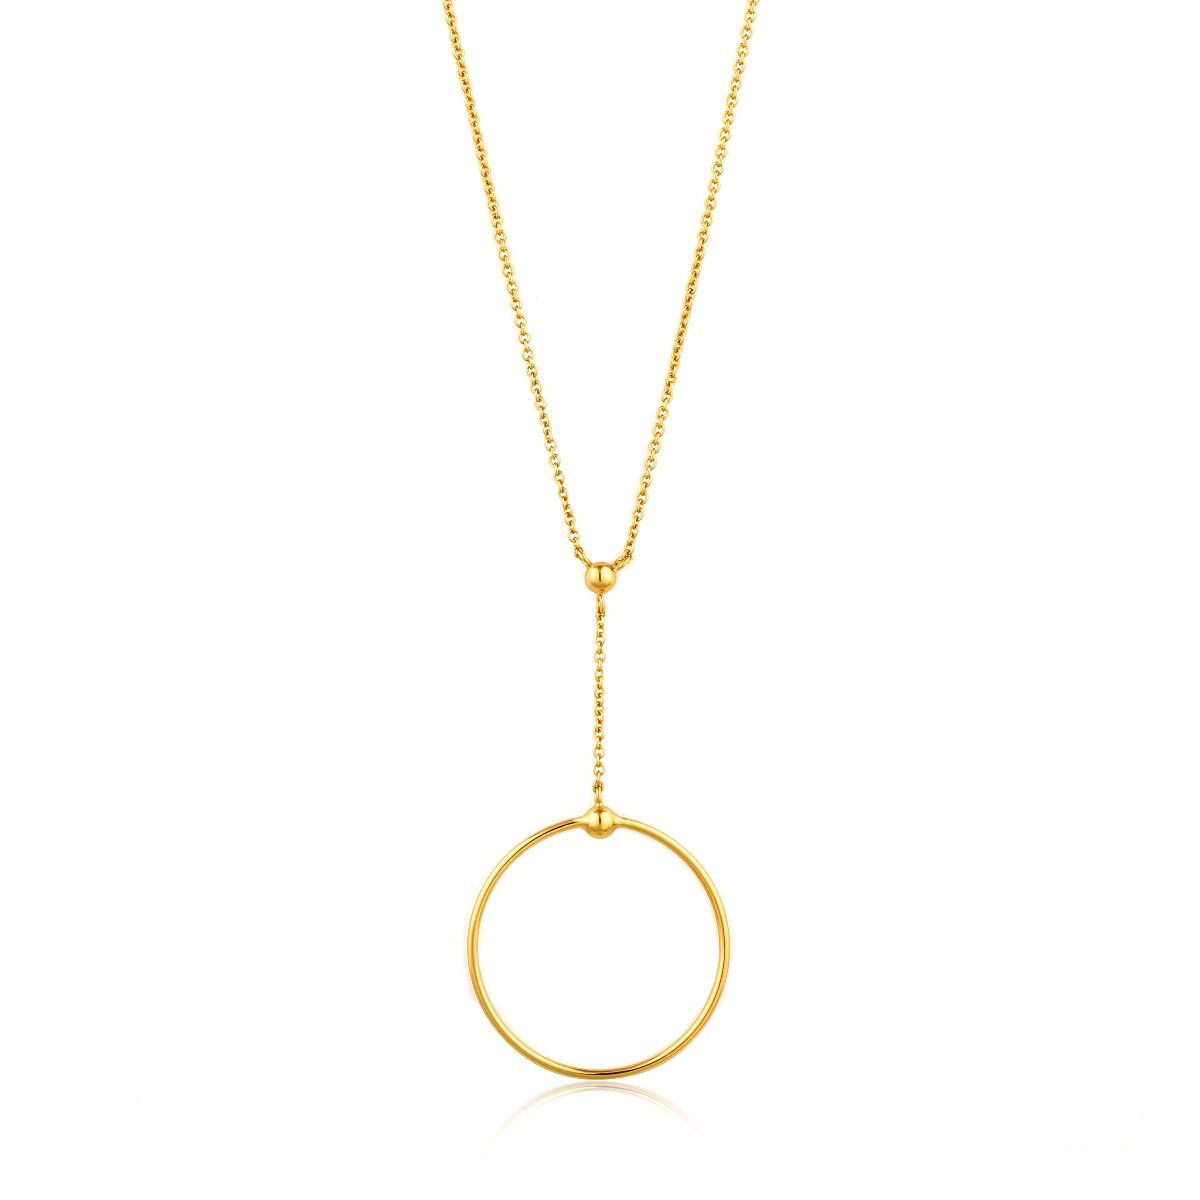 Buy Ania Haie Orbit Drop Circle Necklace - Gold Online in UK